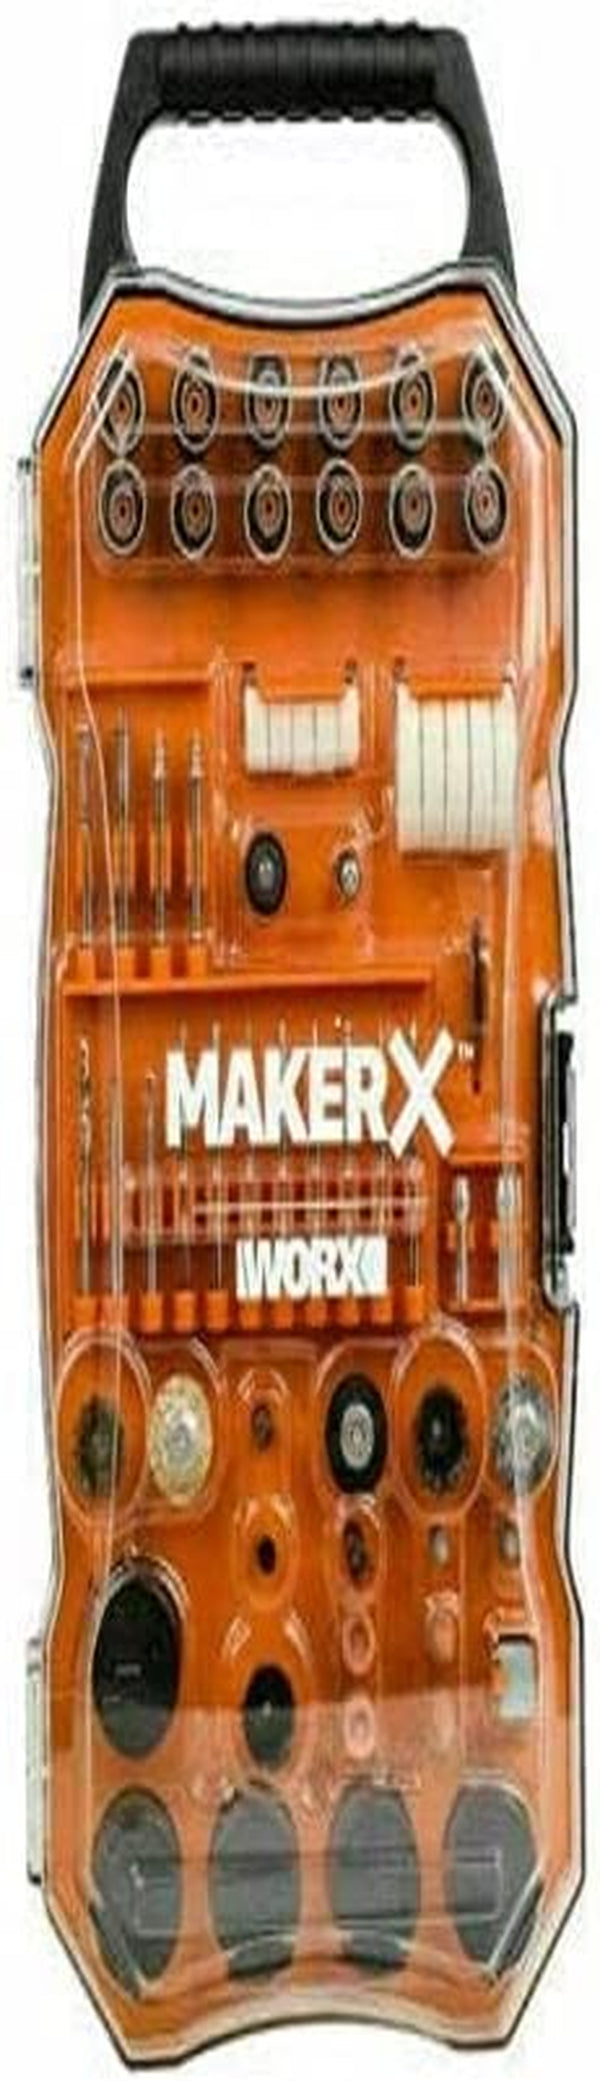 Worx 20V Makerx Rotary Tool Accessory Kit 201 Pieces in Carry Case